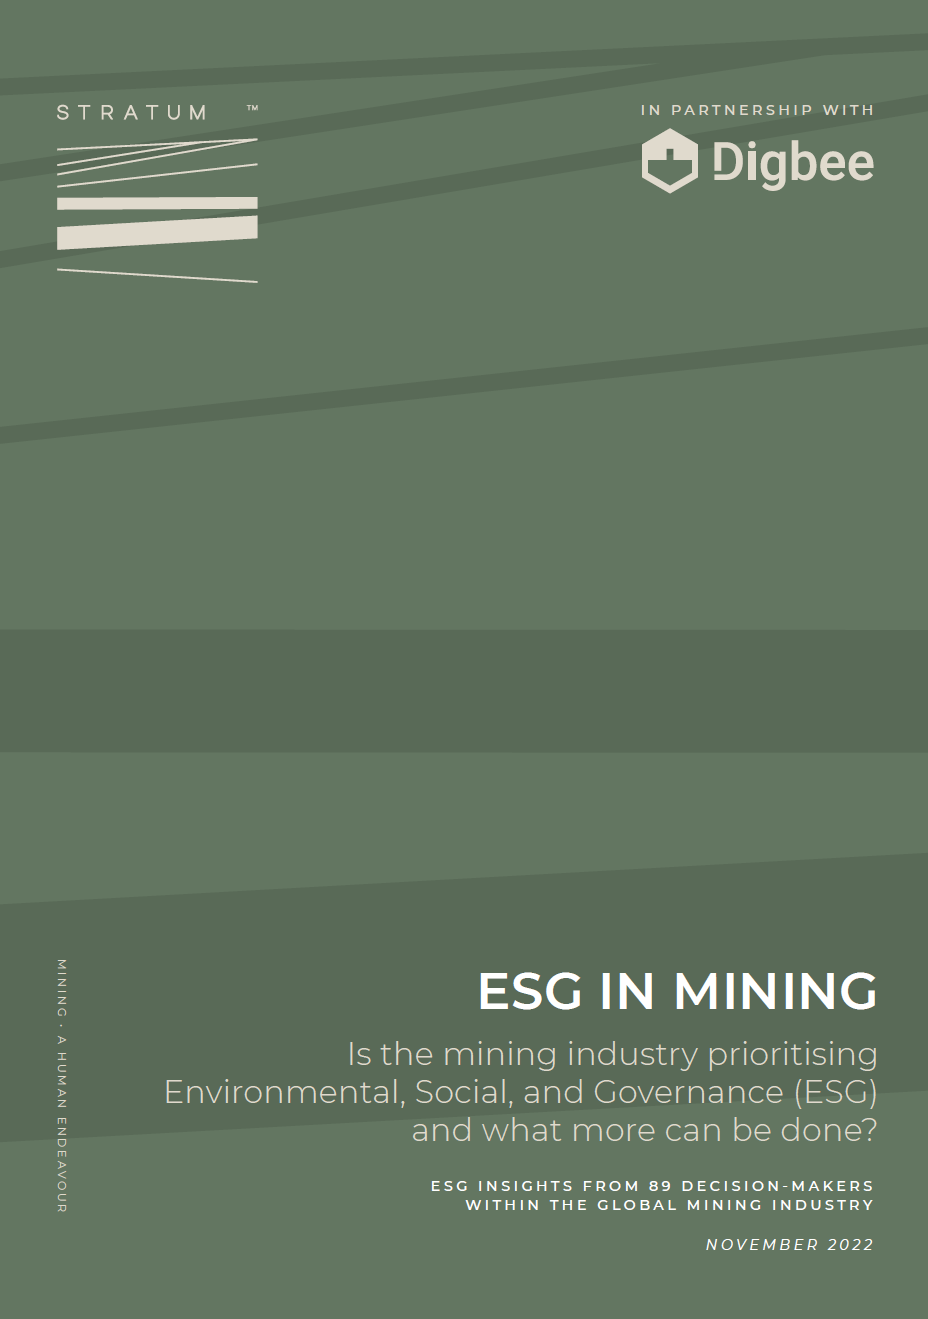 The Future of Mining and ESG